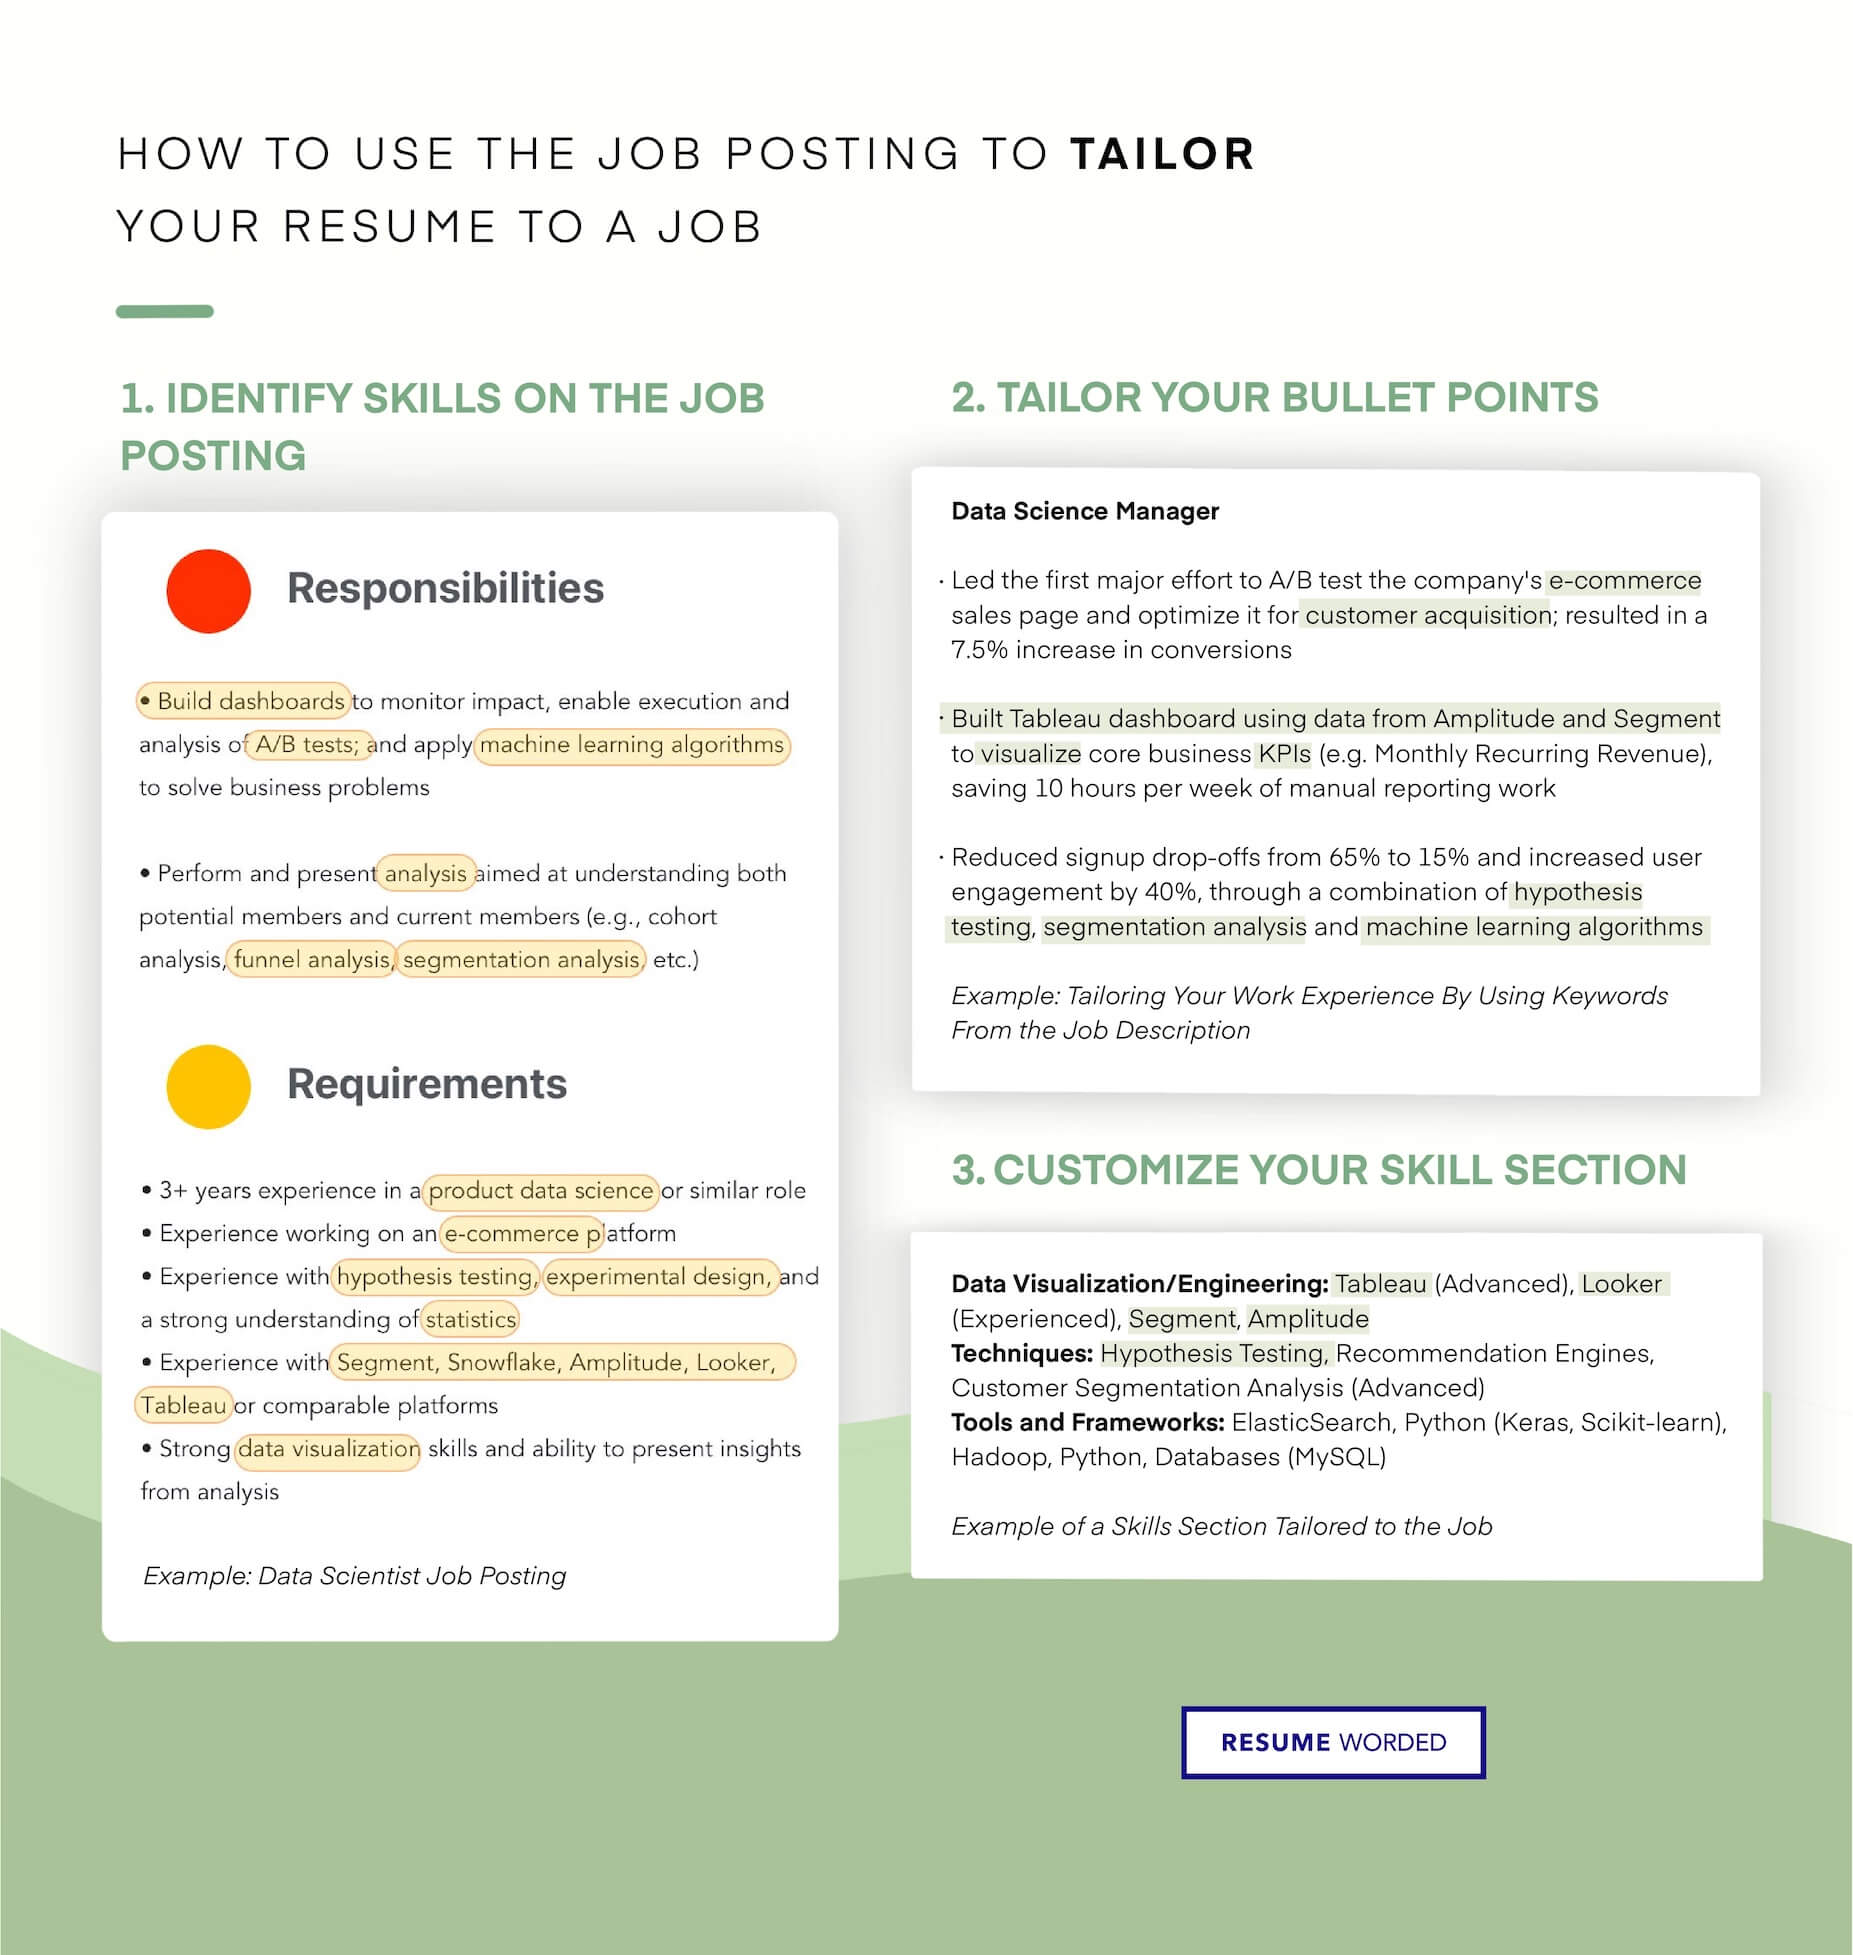 Tailor your resume